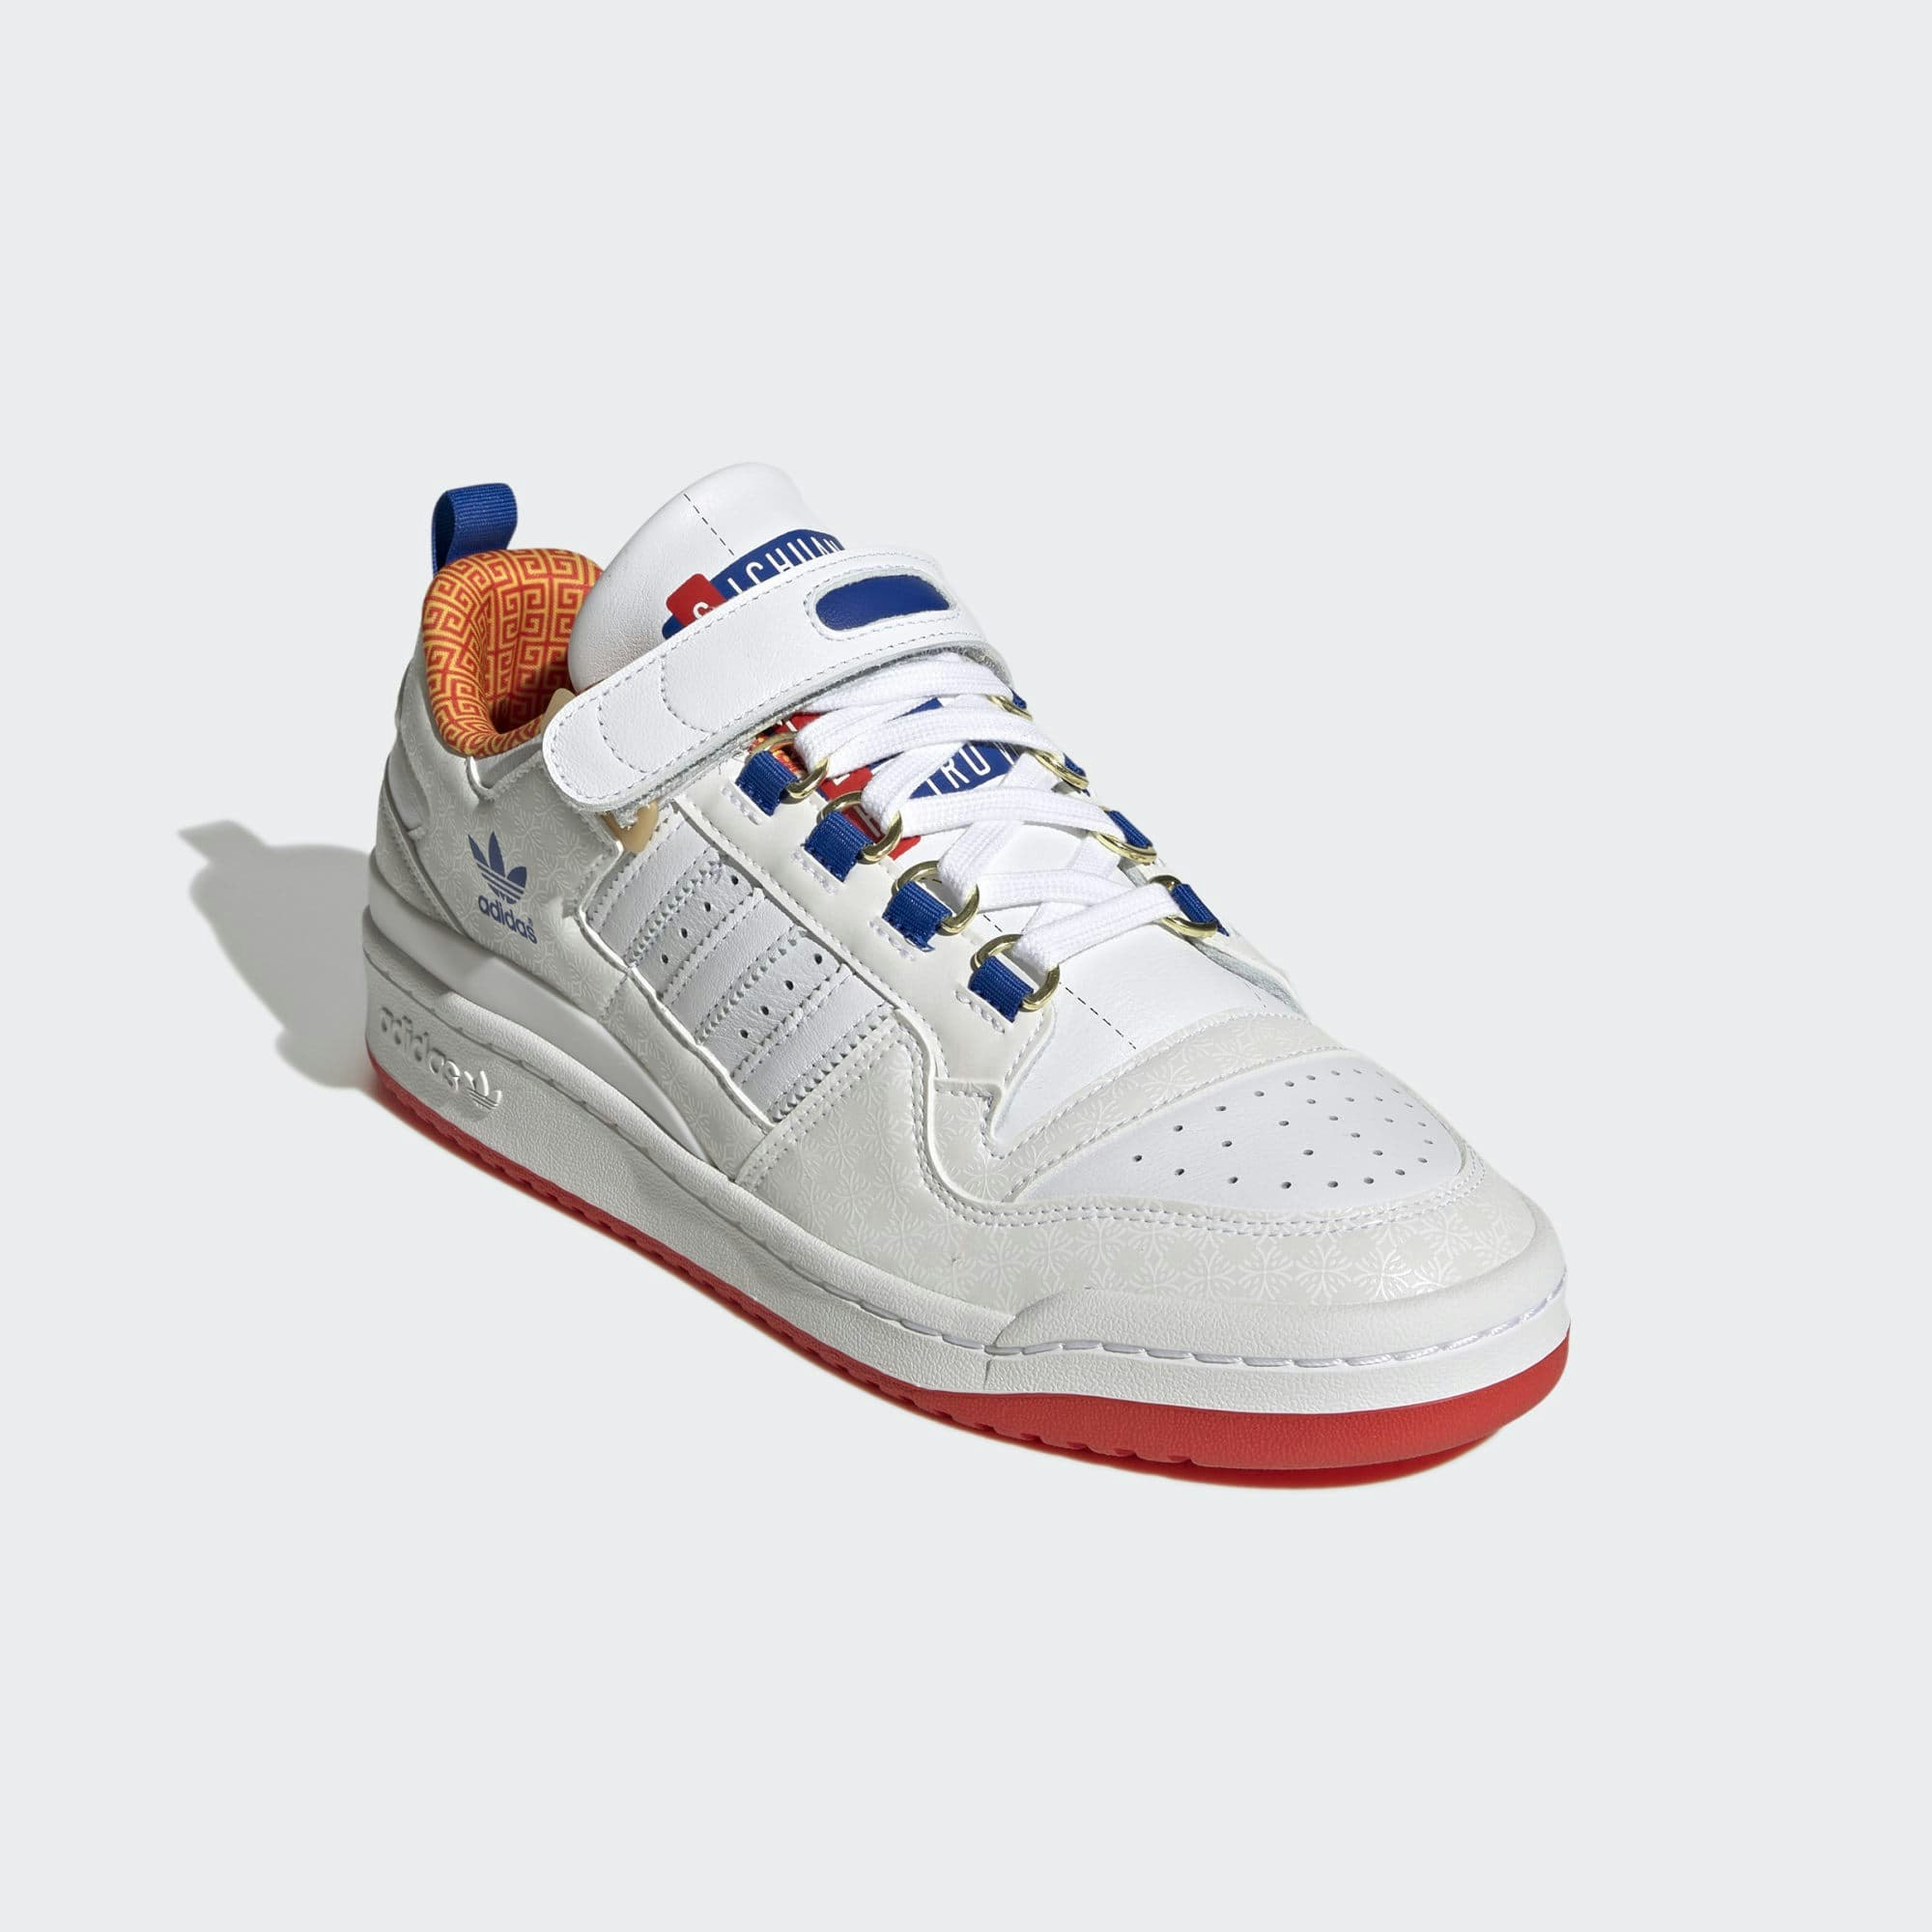 Superfly x adidas Forum Low "Quality Time&Foodies"